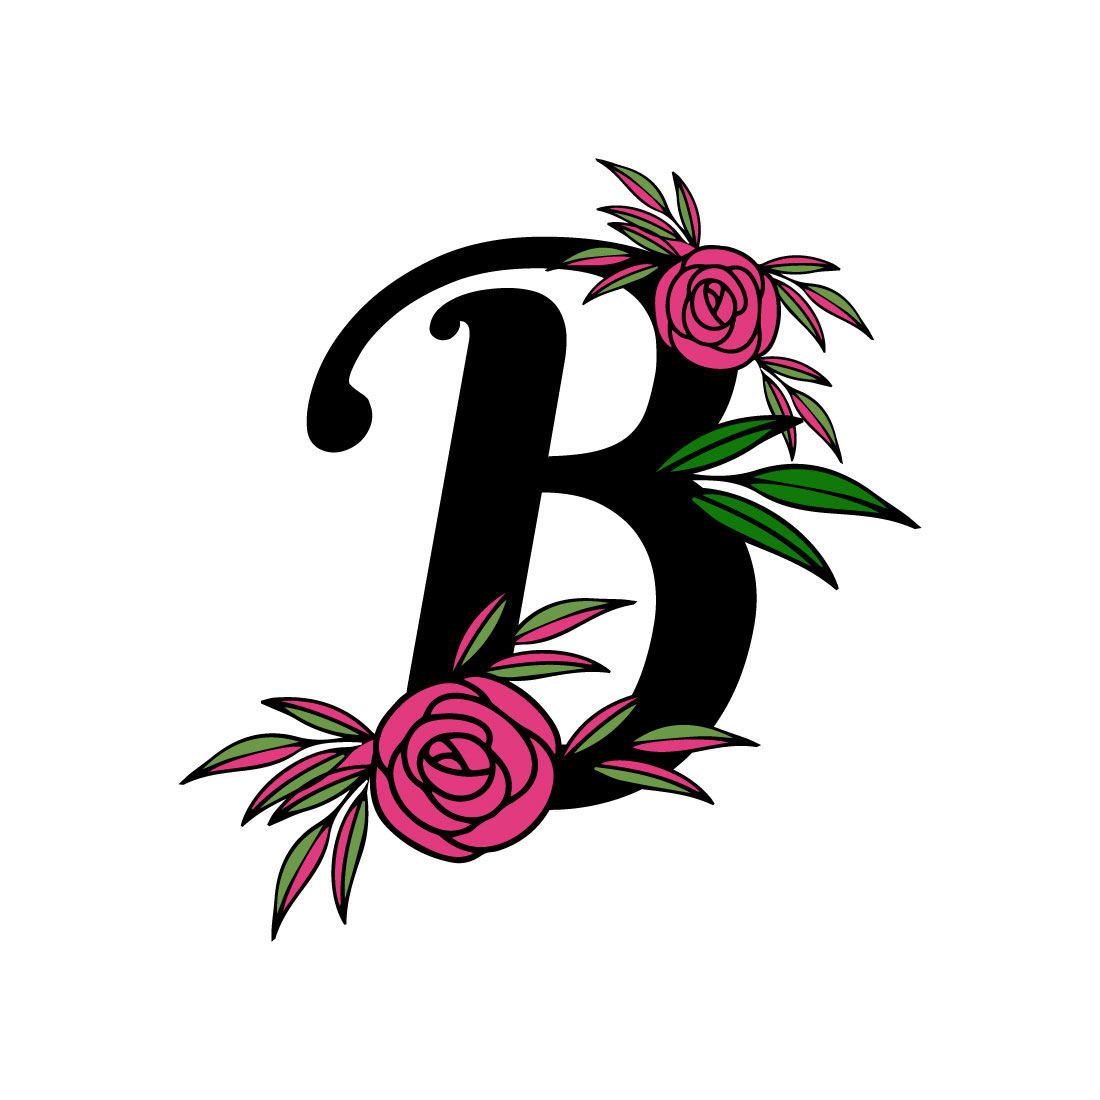 Free B letter logo preview image.